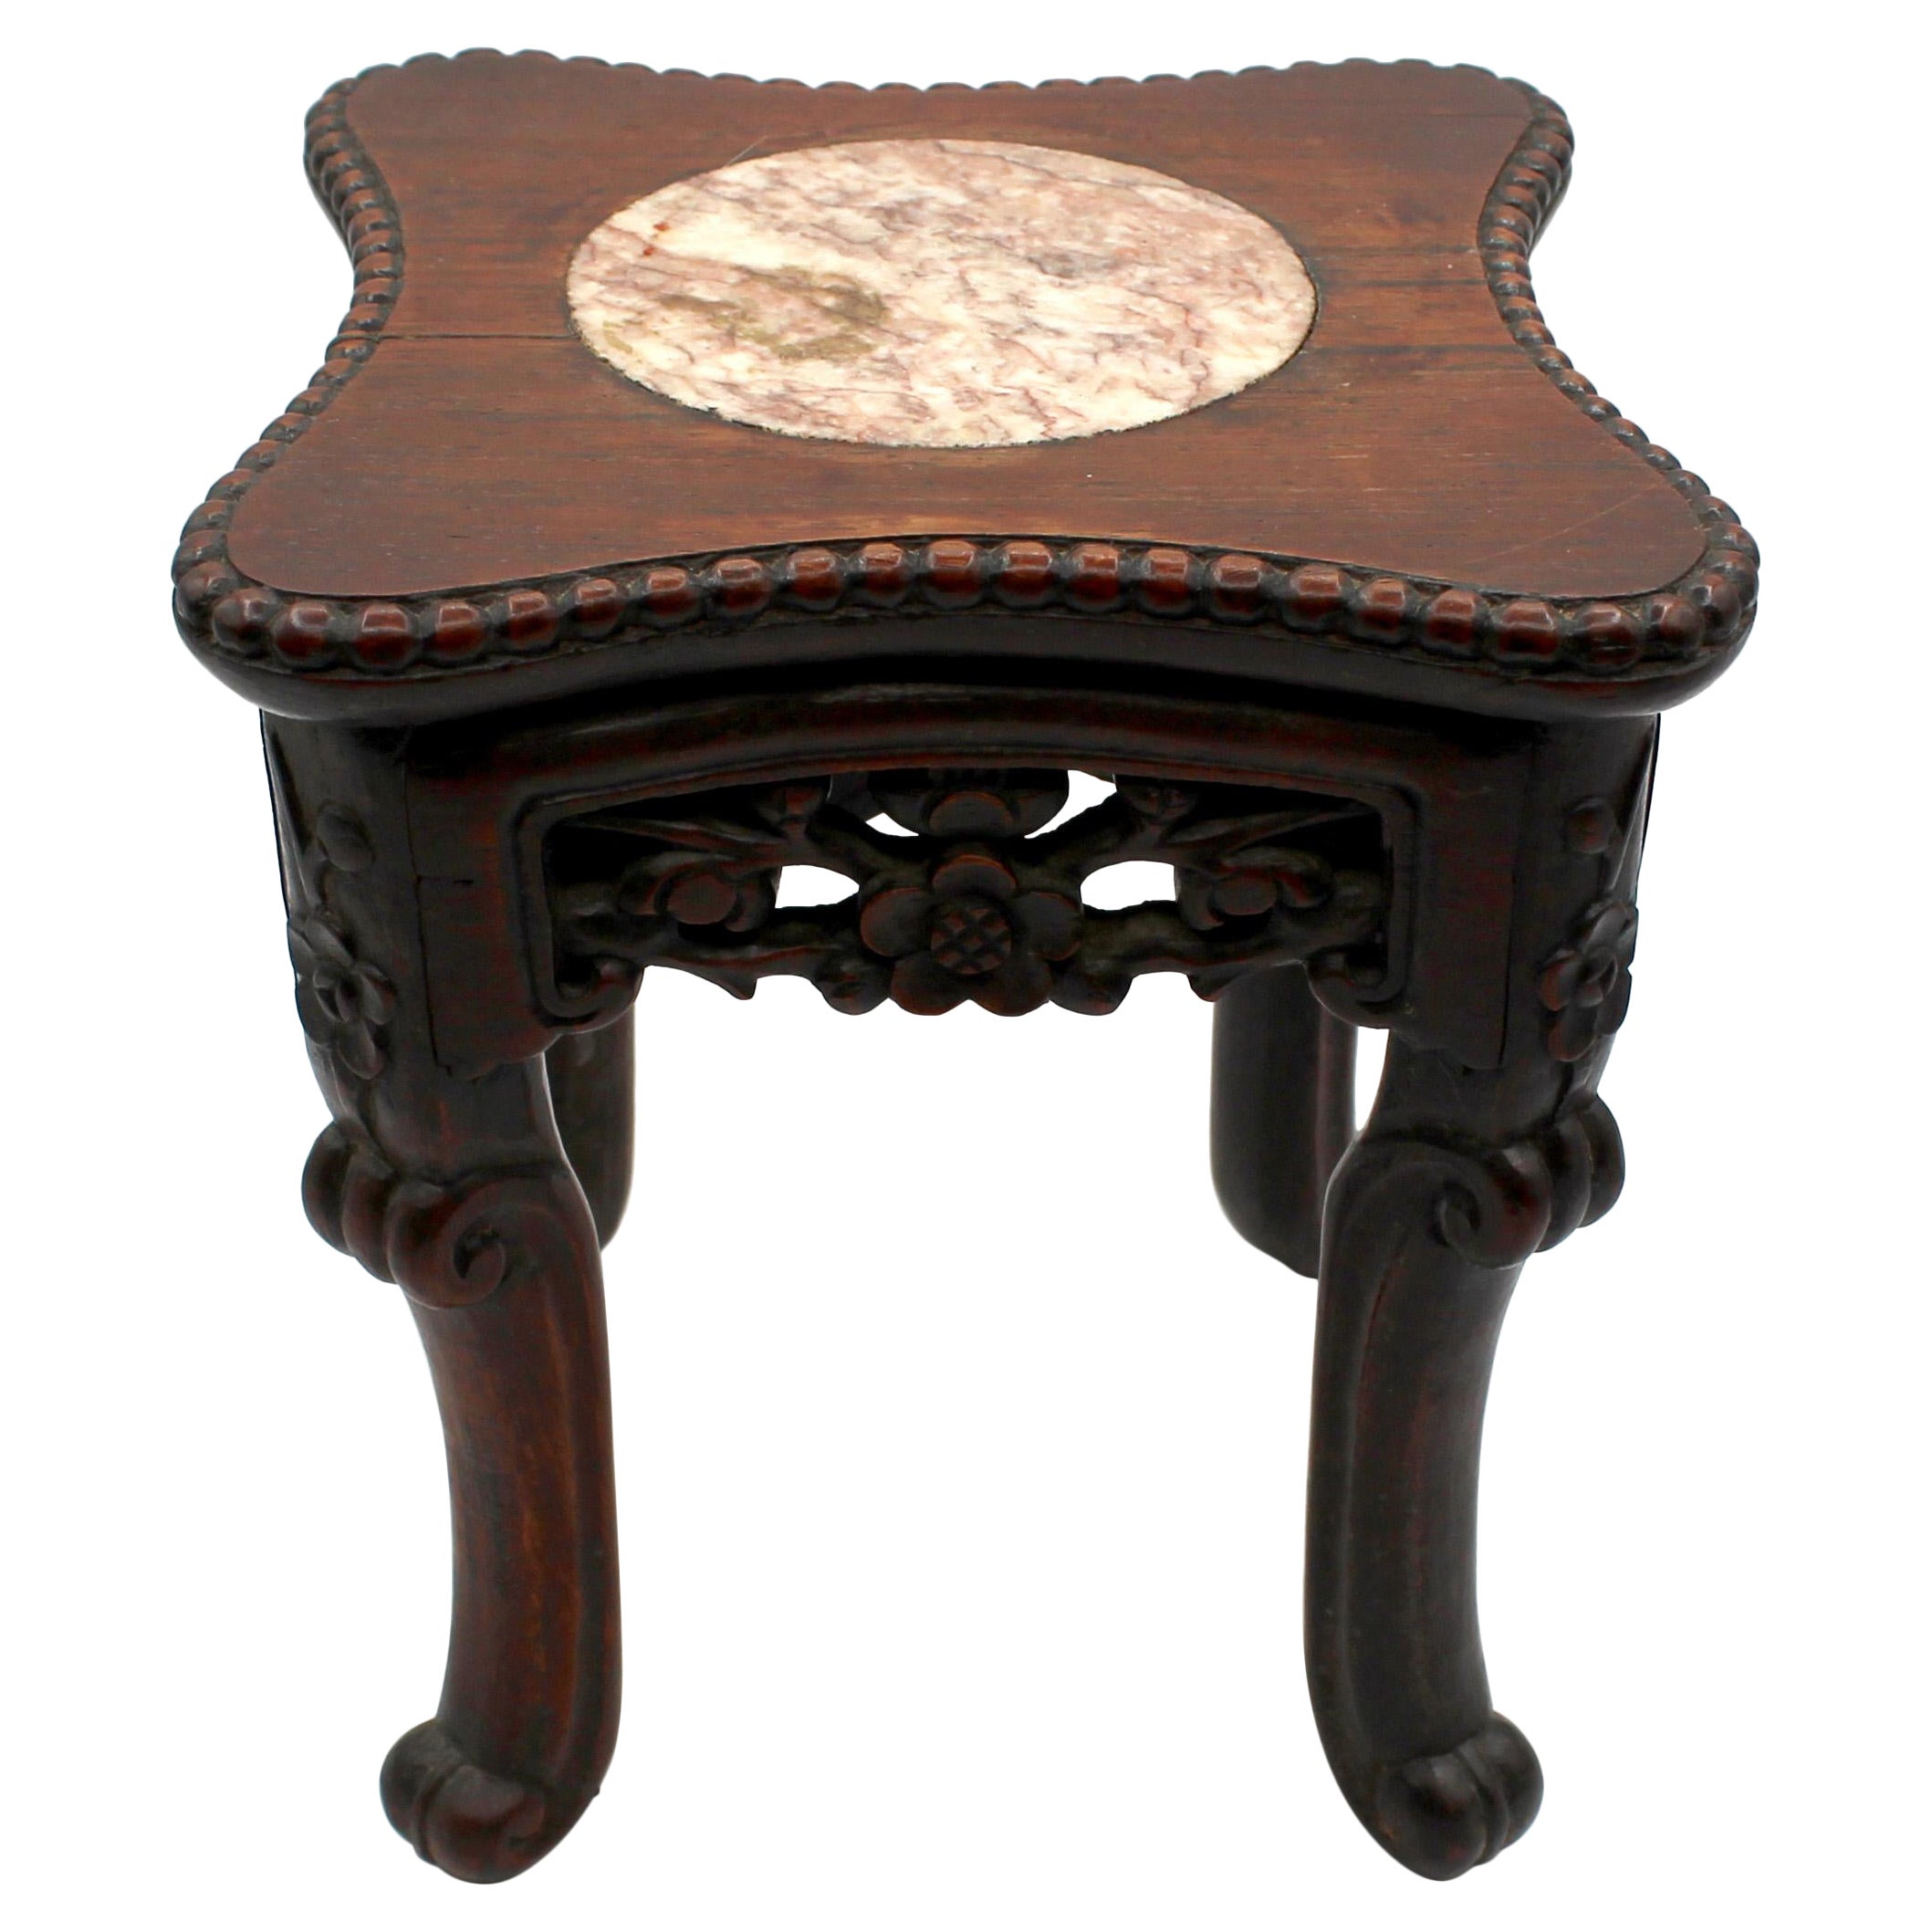 3rd Quarter 19th Century Miniature Taboret Table For Sale